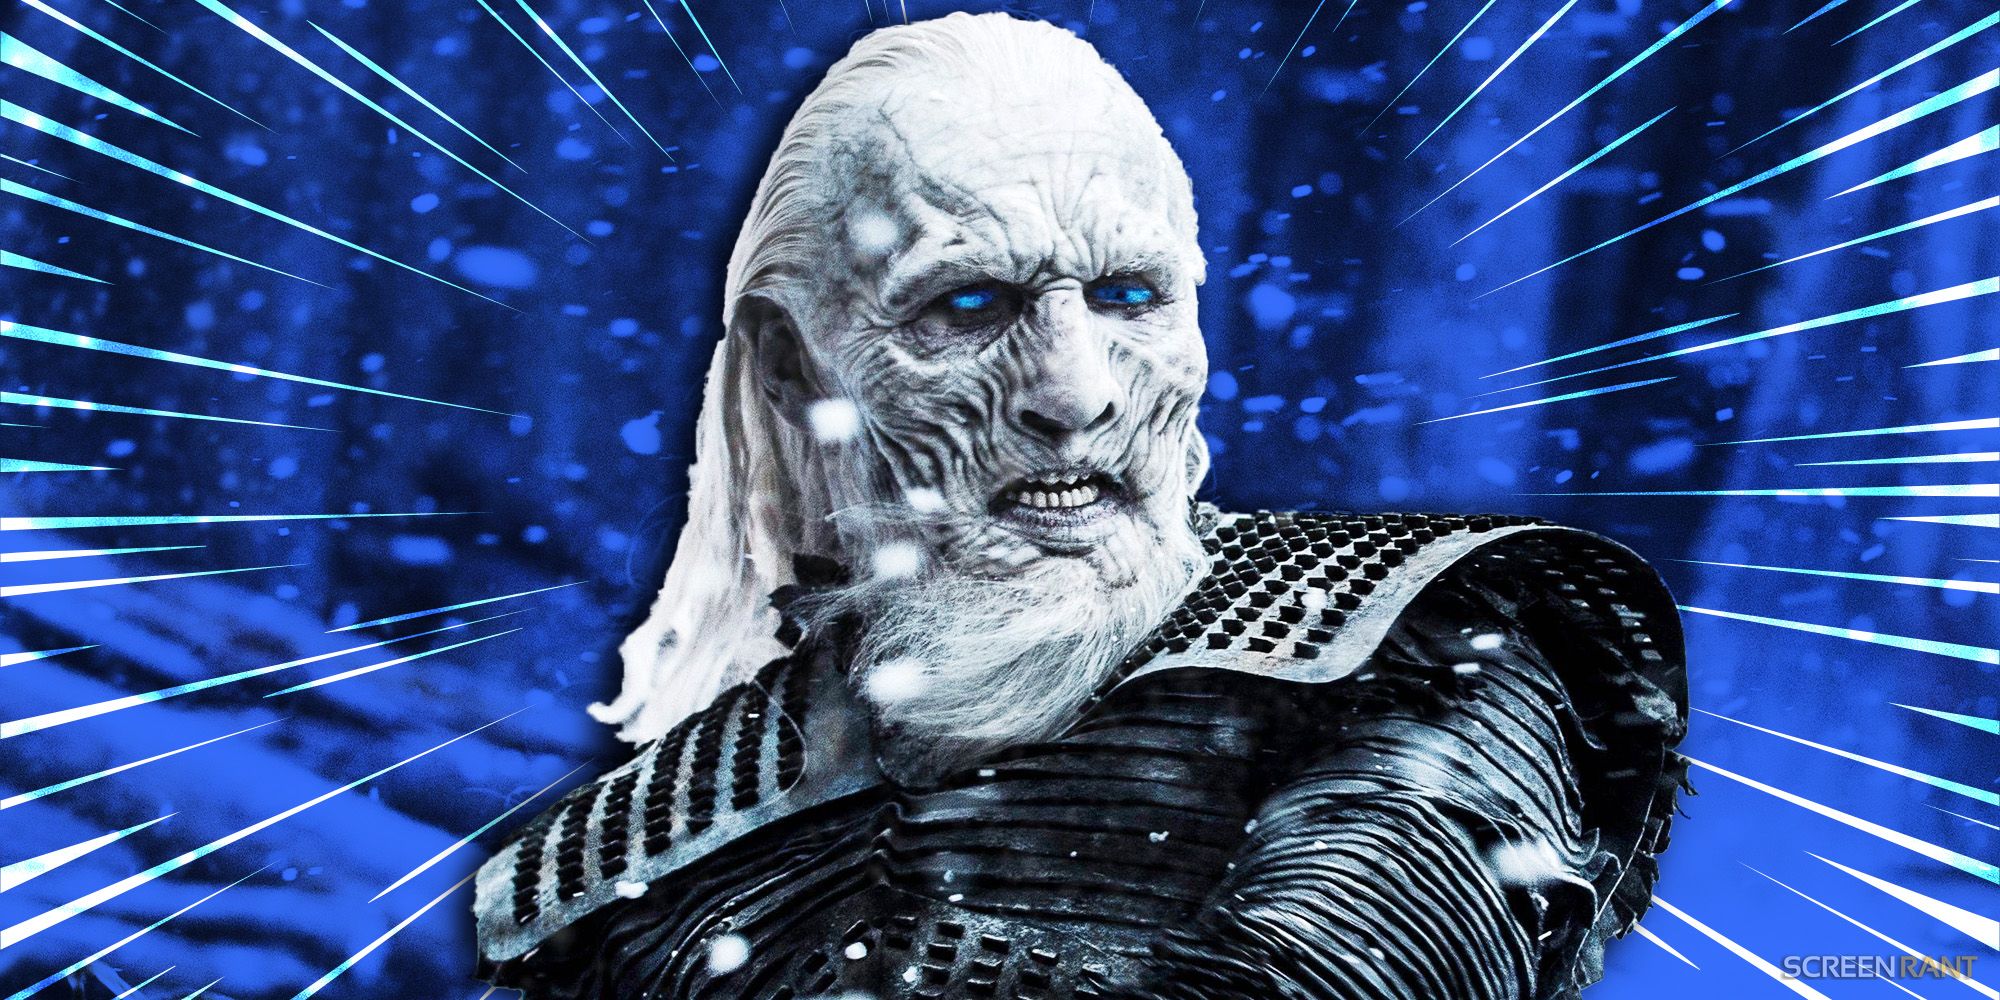 A White Walker in Game of Thrones with an icy blue forest in the background